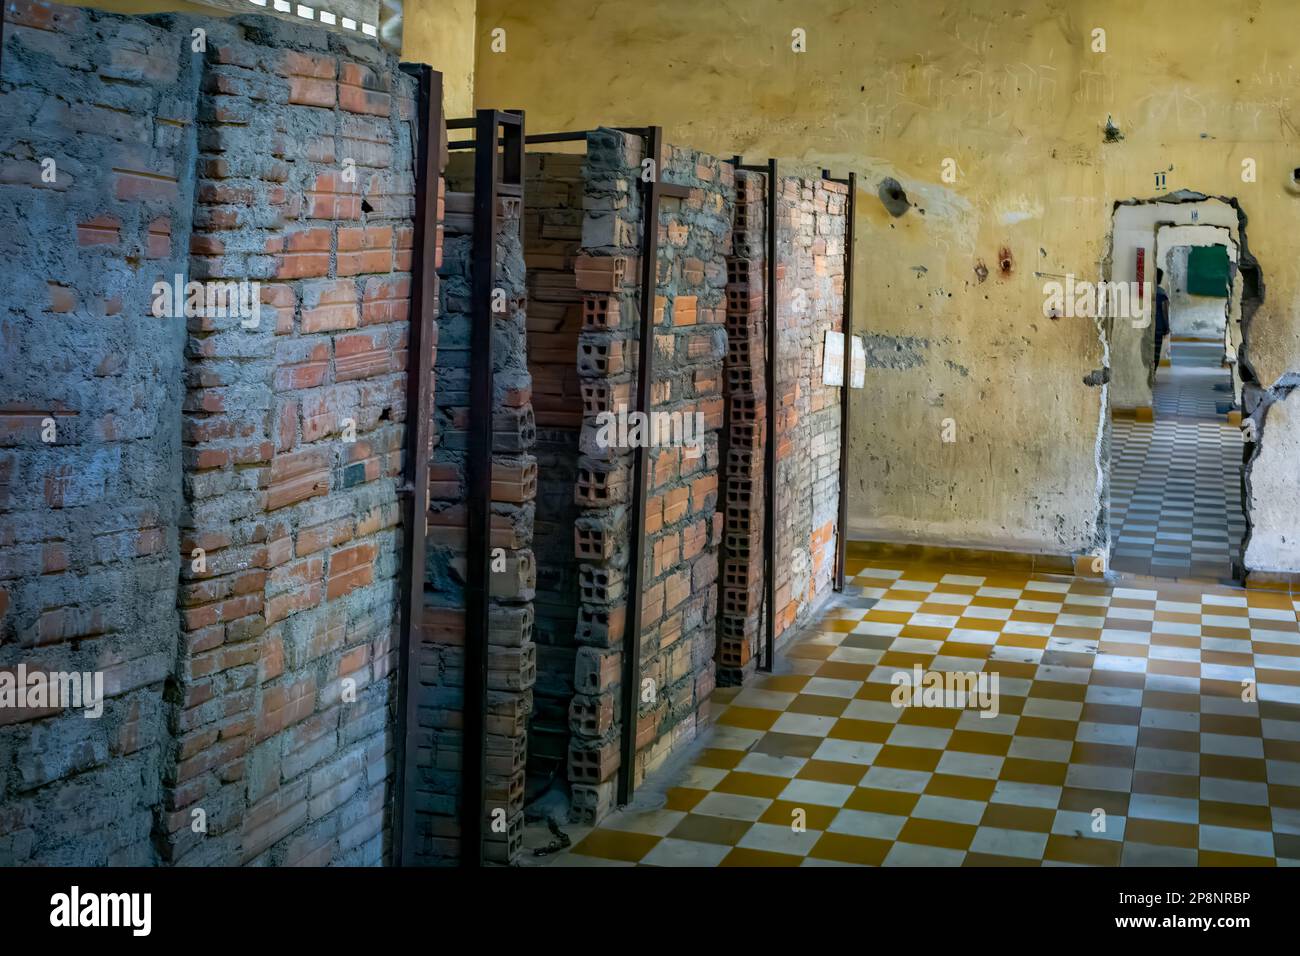 Rough built cells and doorways punched through concrete walls linking former former classrooms in the notorious Tuol Sleng S-21 torture and genocide Stock Photo